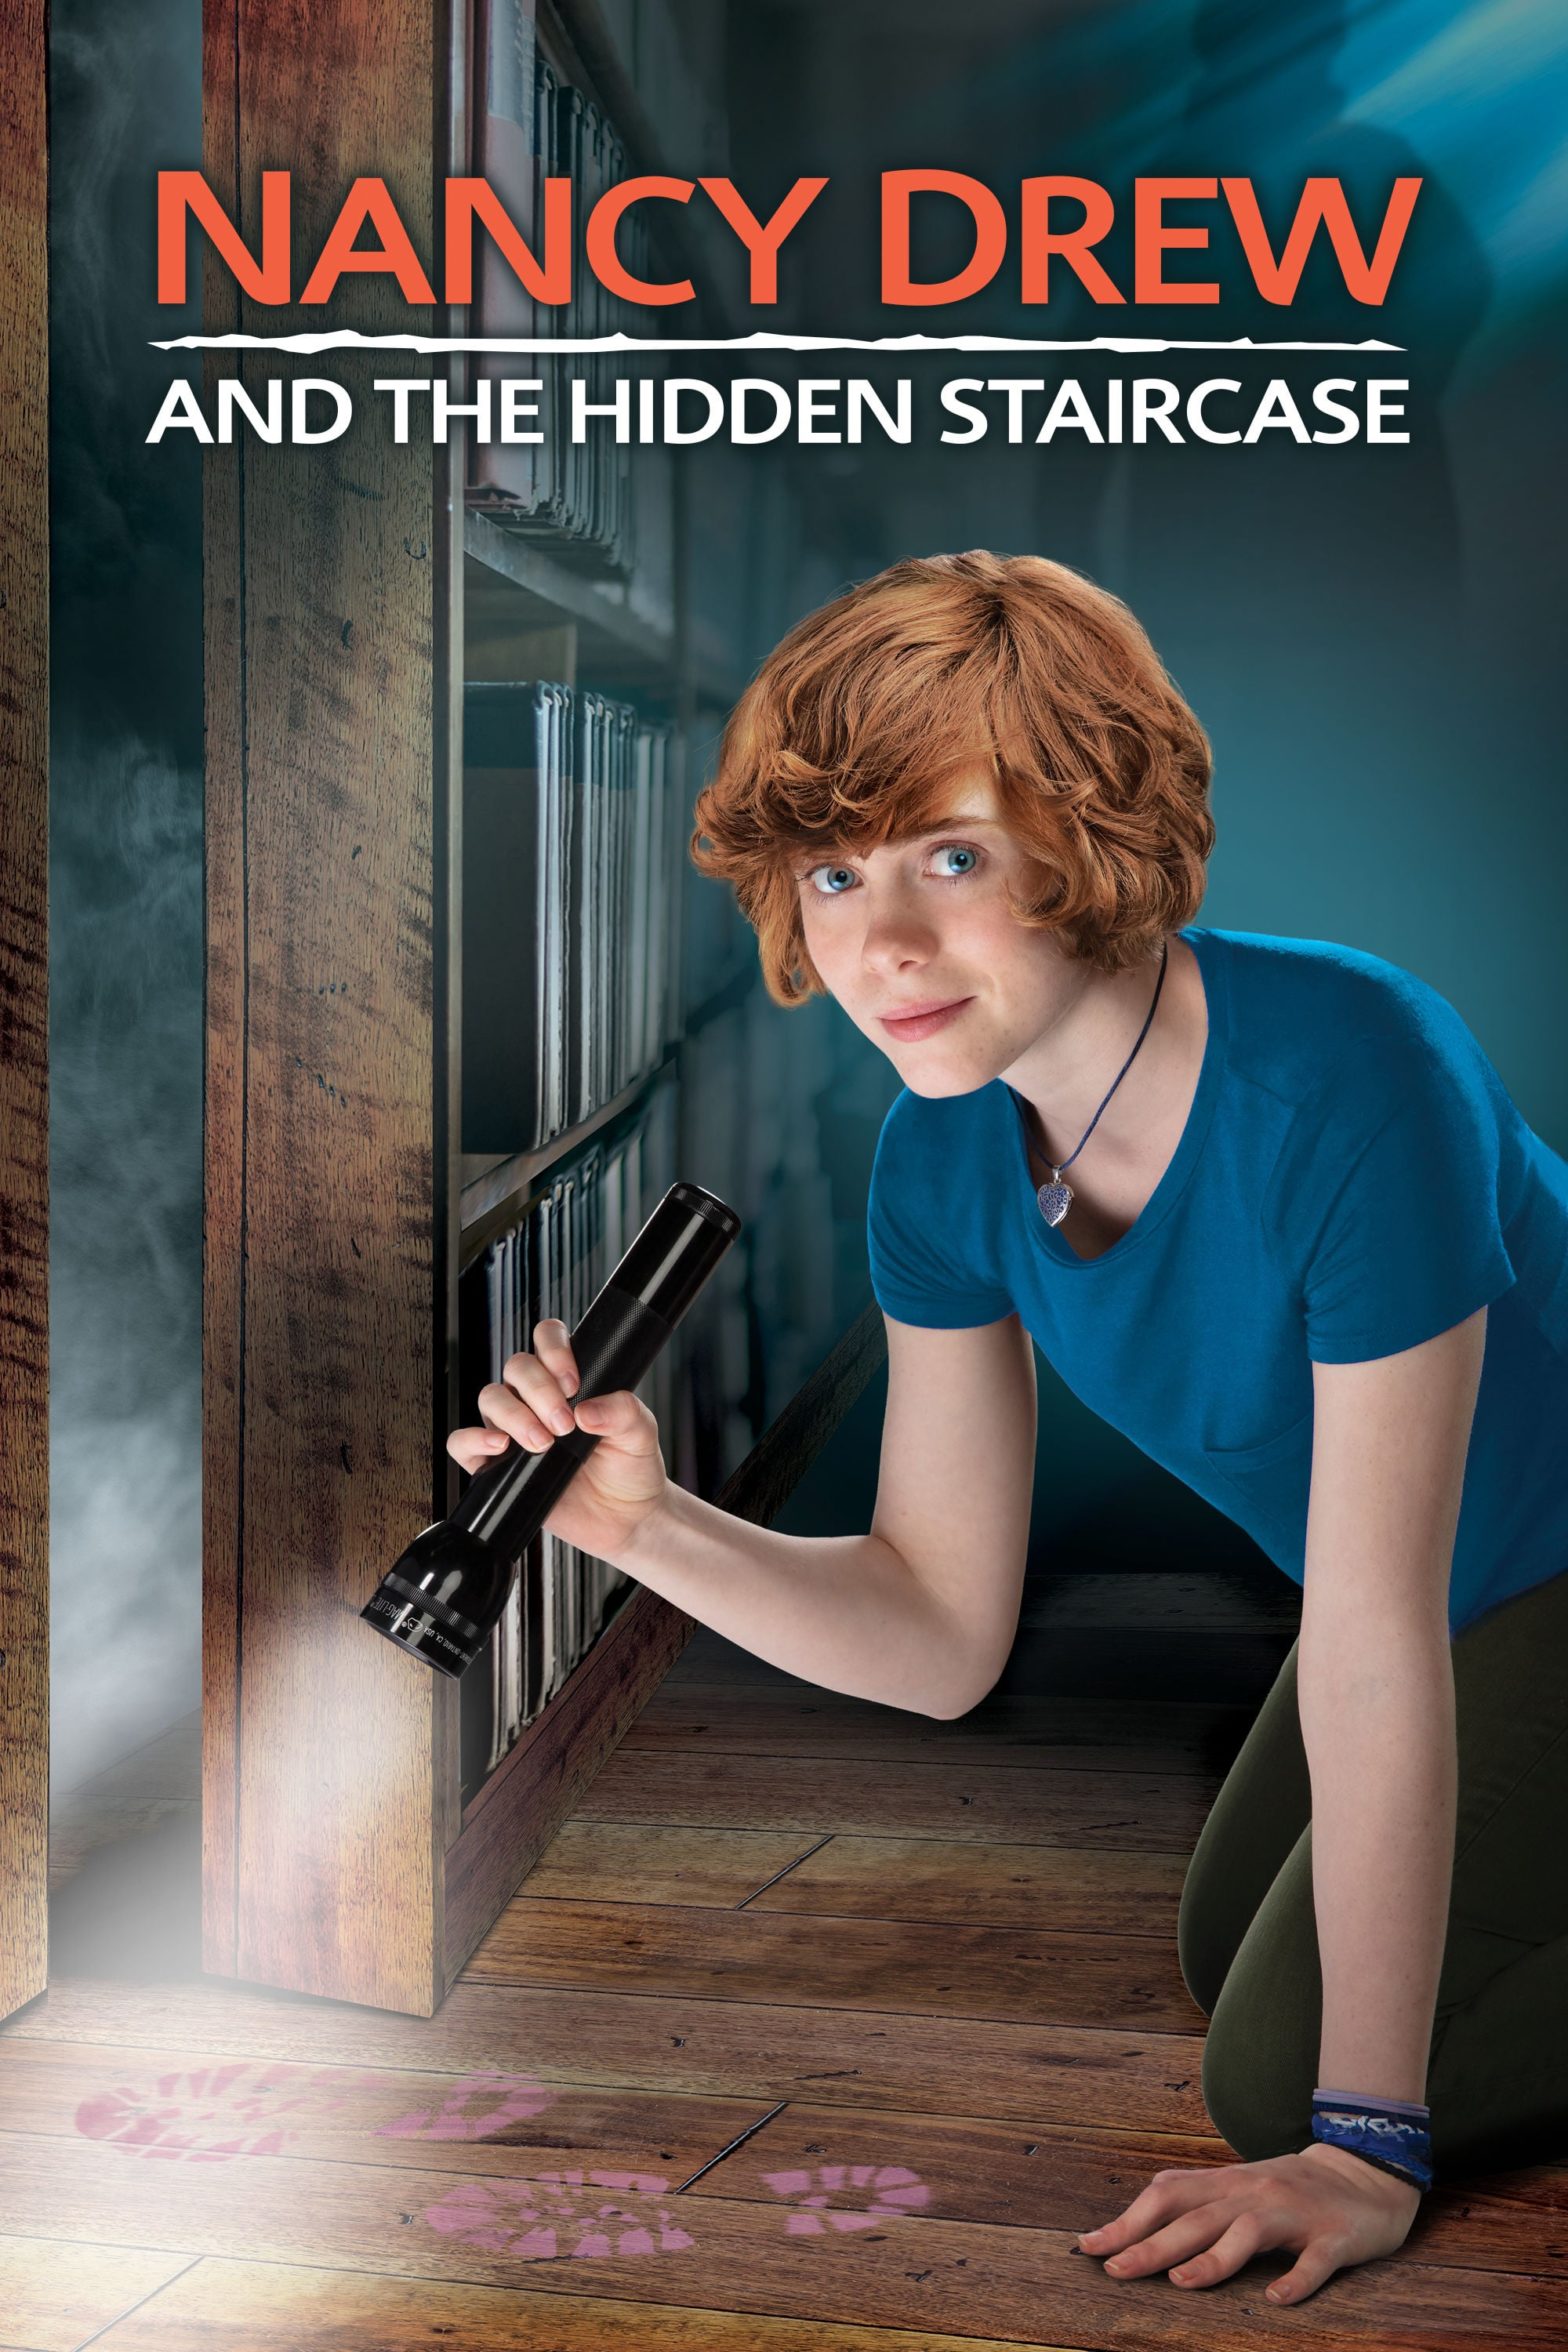 Poster for the movie "Nancy Drew and the Hidden Staircase"